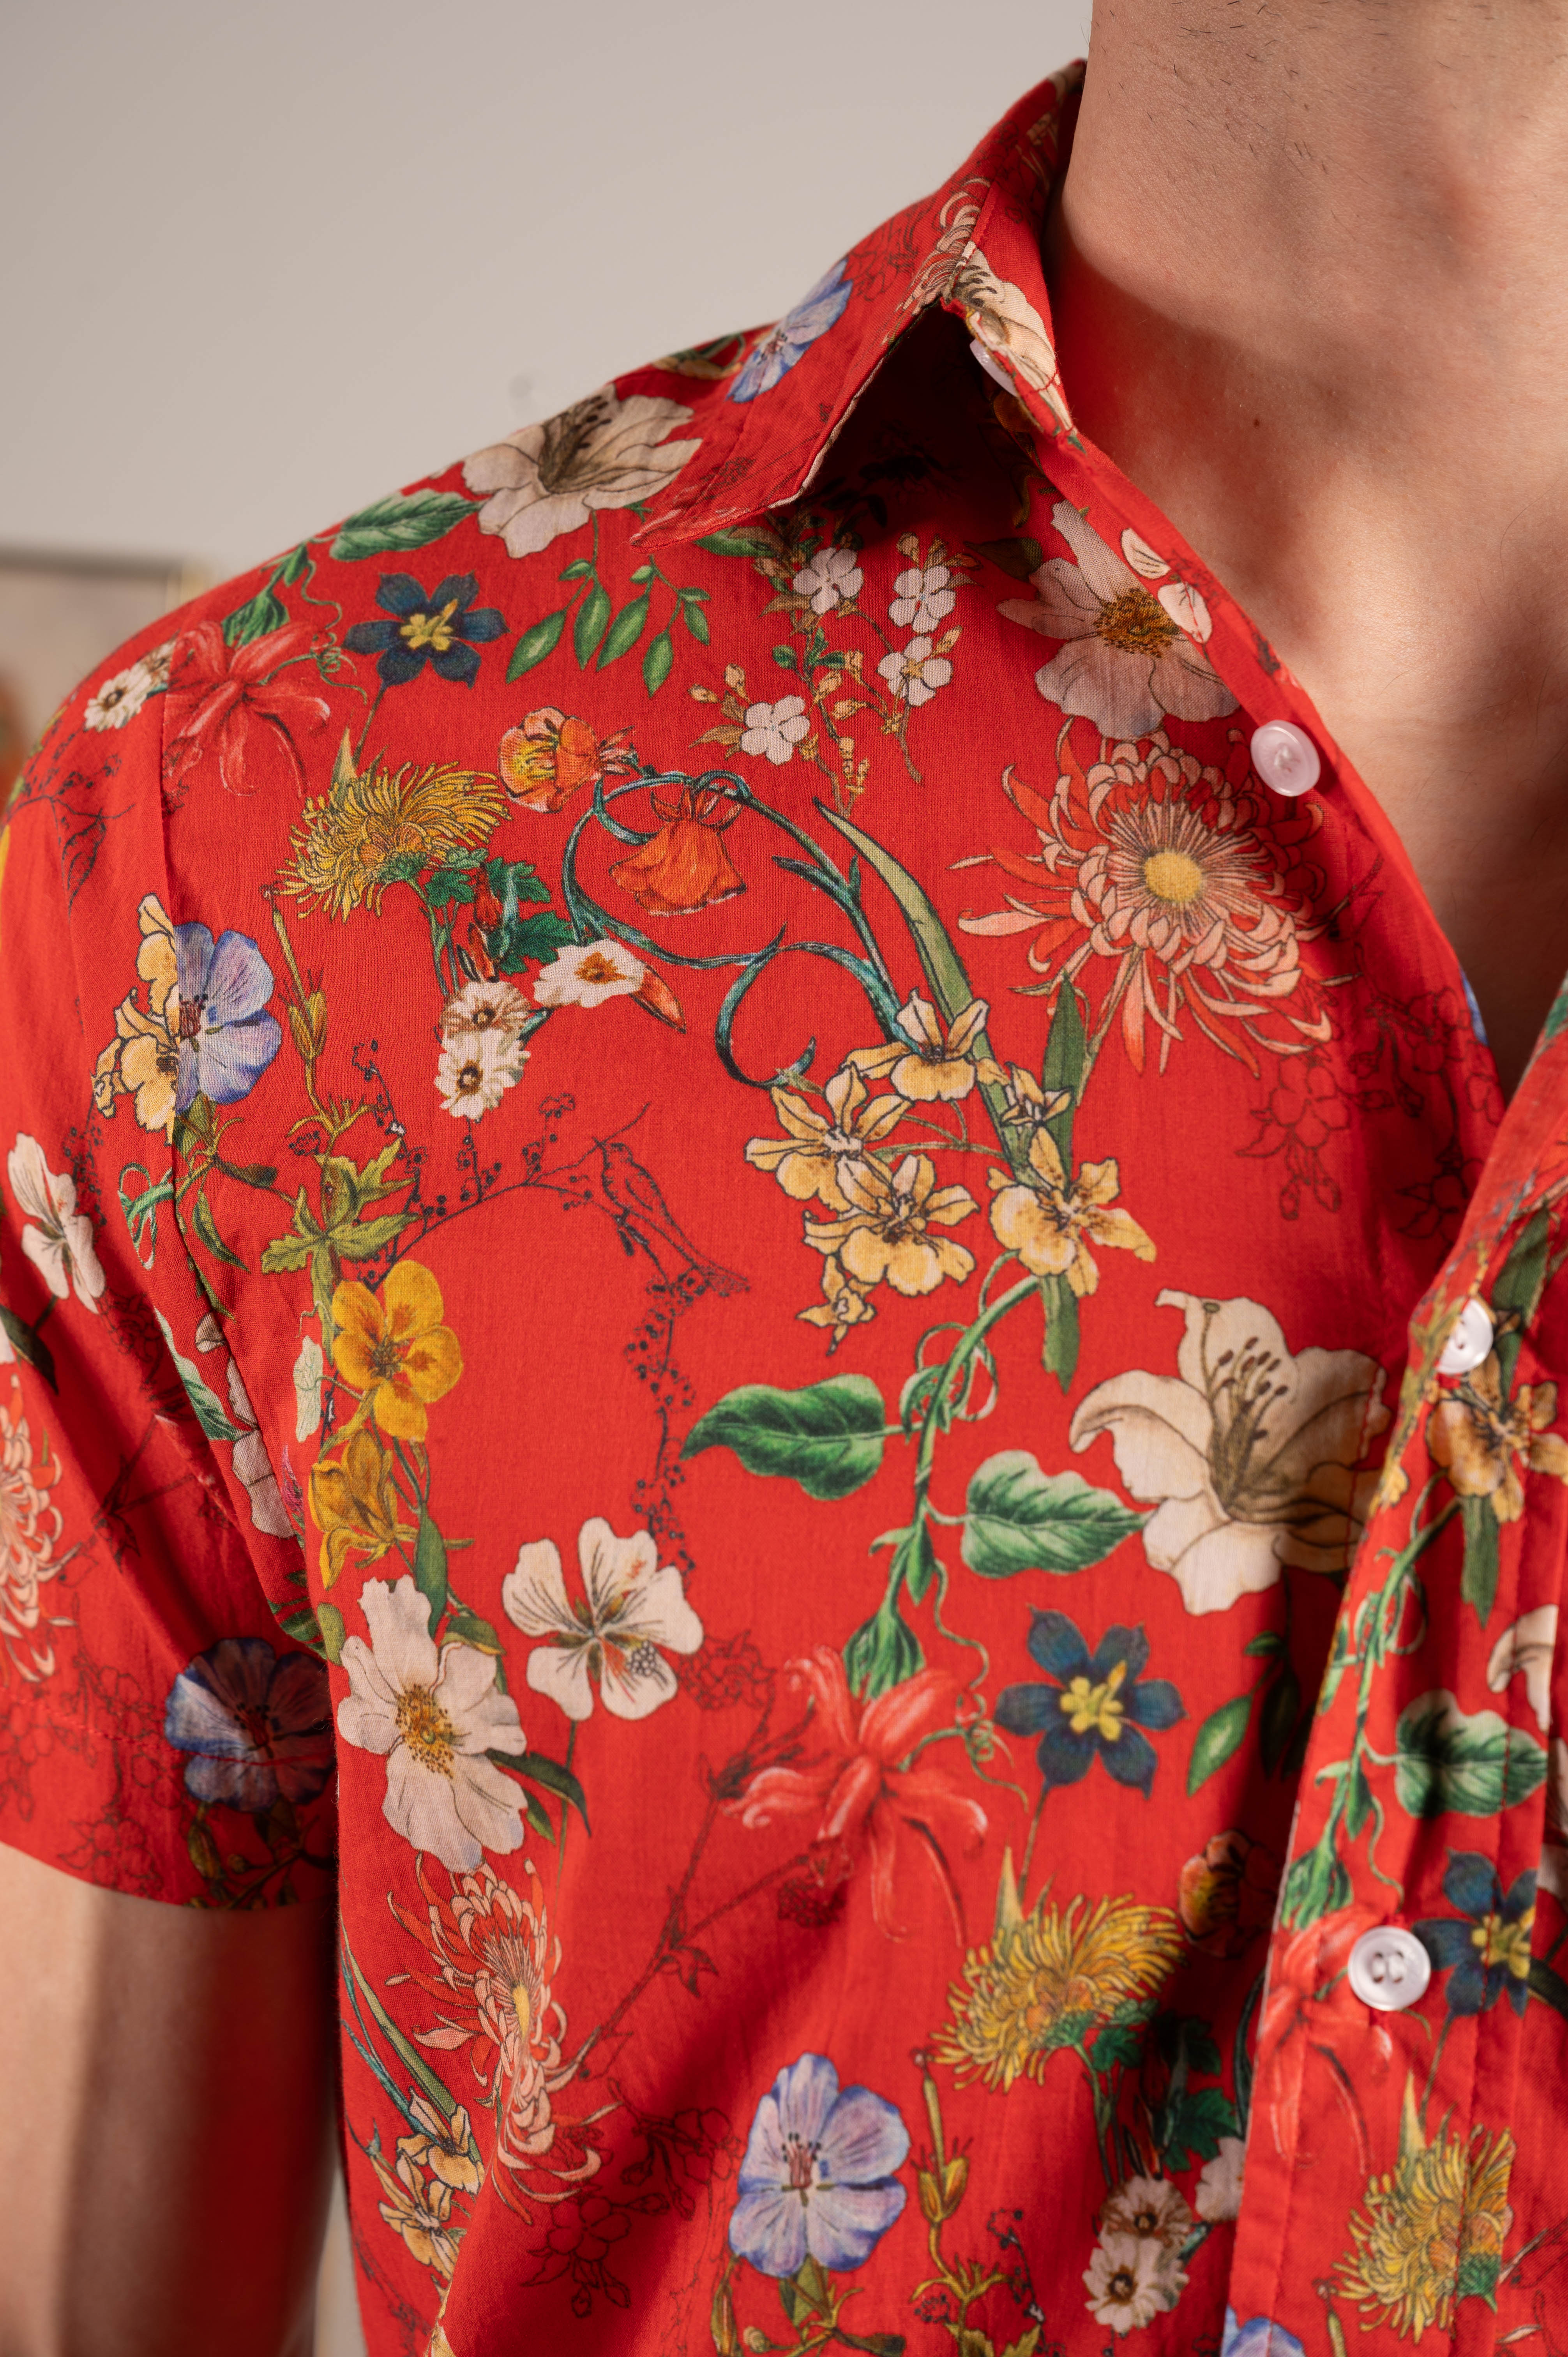 'The Sheril' Short Sleeve Shirt in French Red Floral Print